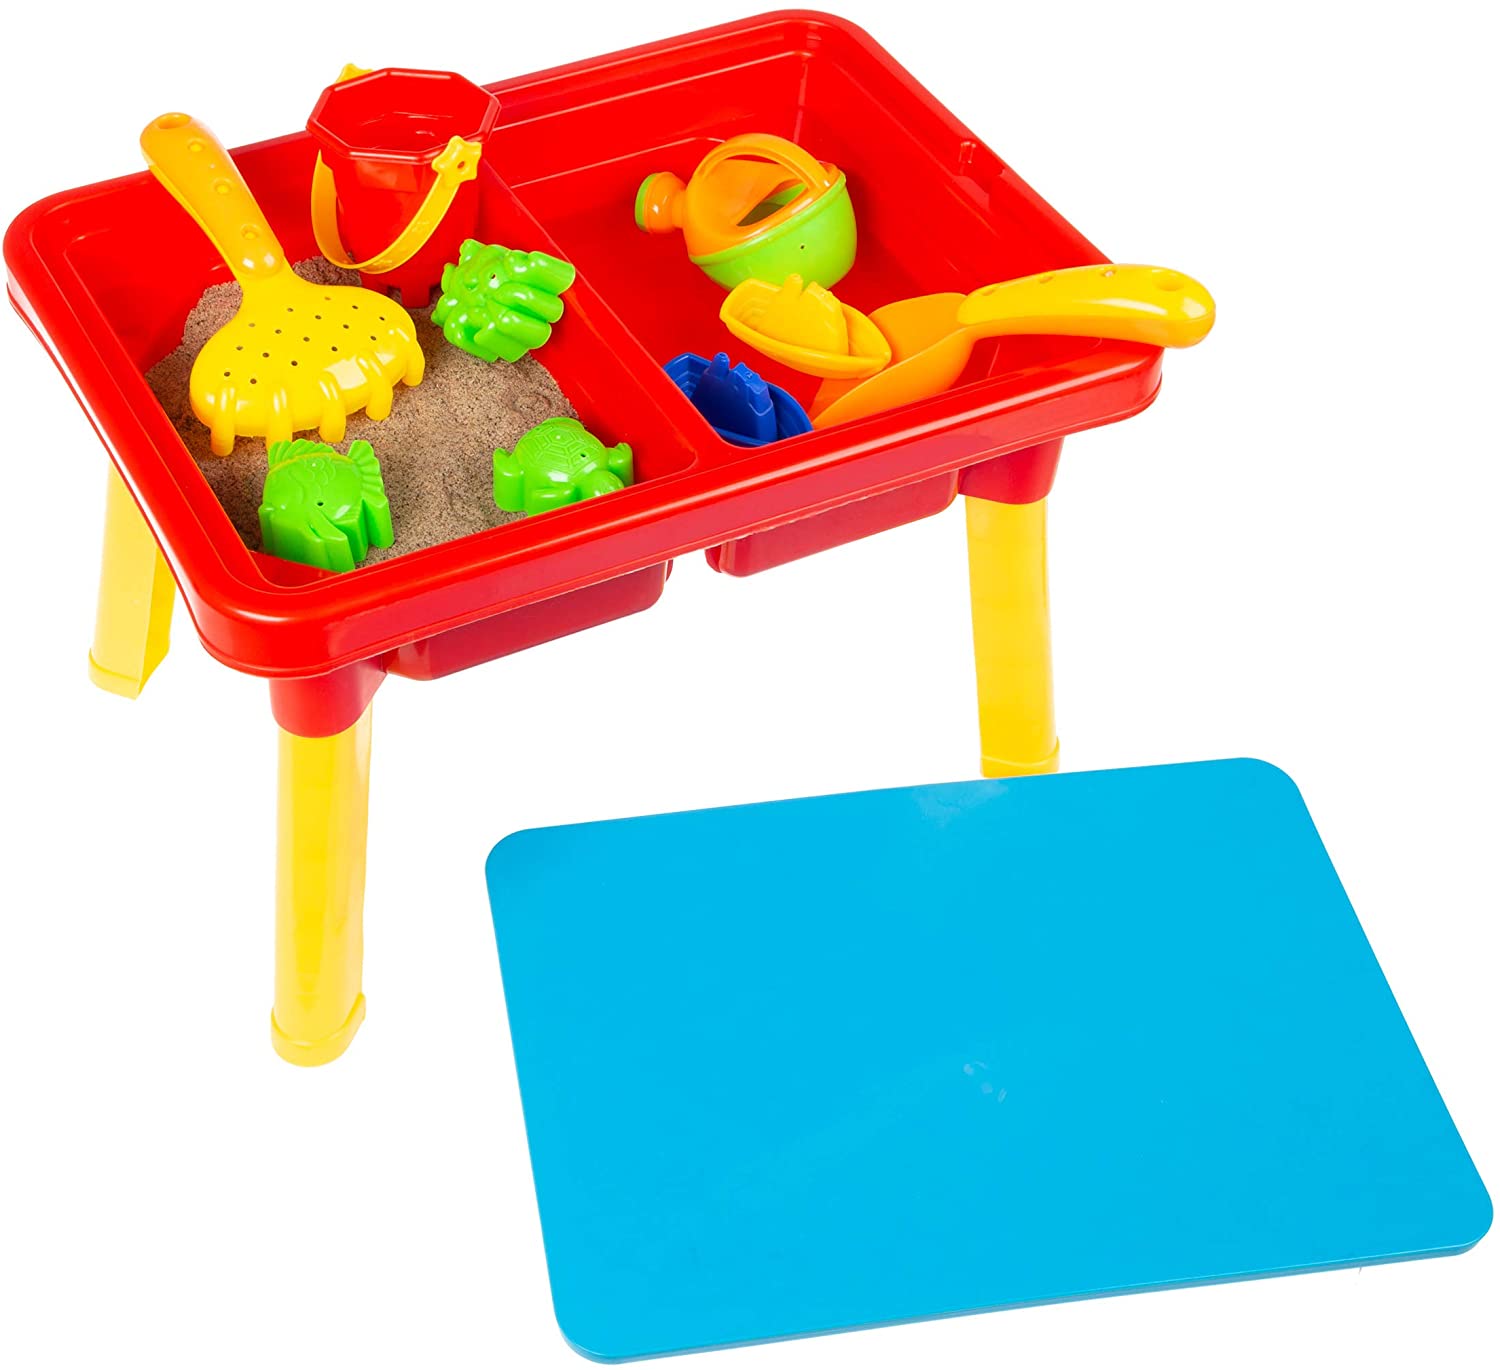 Hey Play Kids' Portable Water or Sand Sensory Table w/ Lid & Accessories $19.30 + FS w/ Amazon Prime or FS on $25+